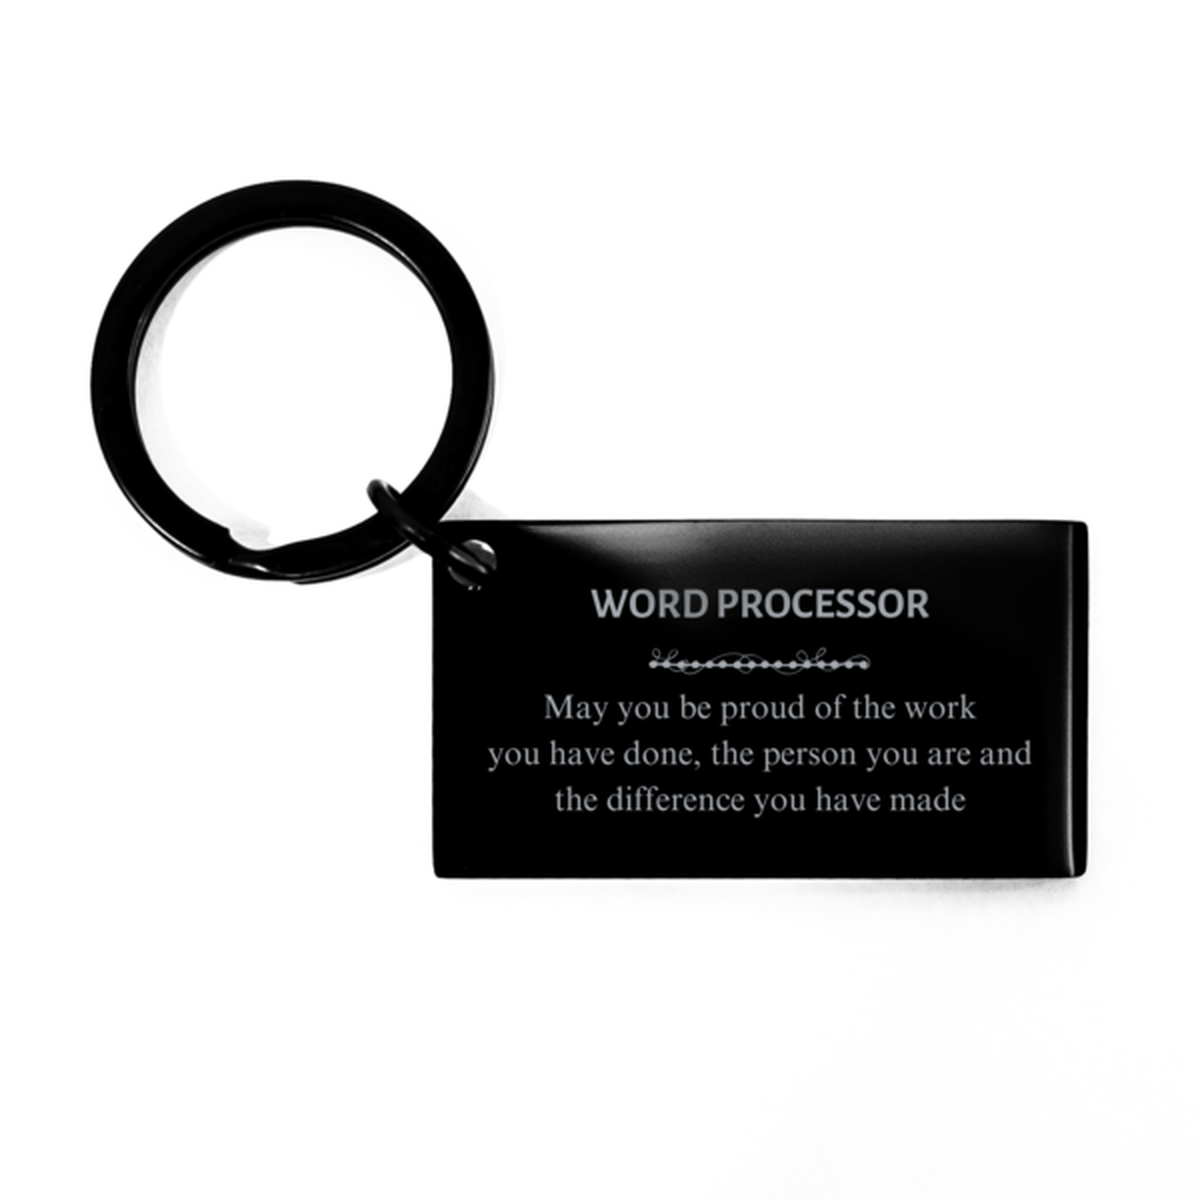 Attendant May you be proud of the work you have done, Retirement Word Processor Keychain for Colleague Appreciation Gifts Amazing for Word Processor